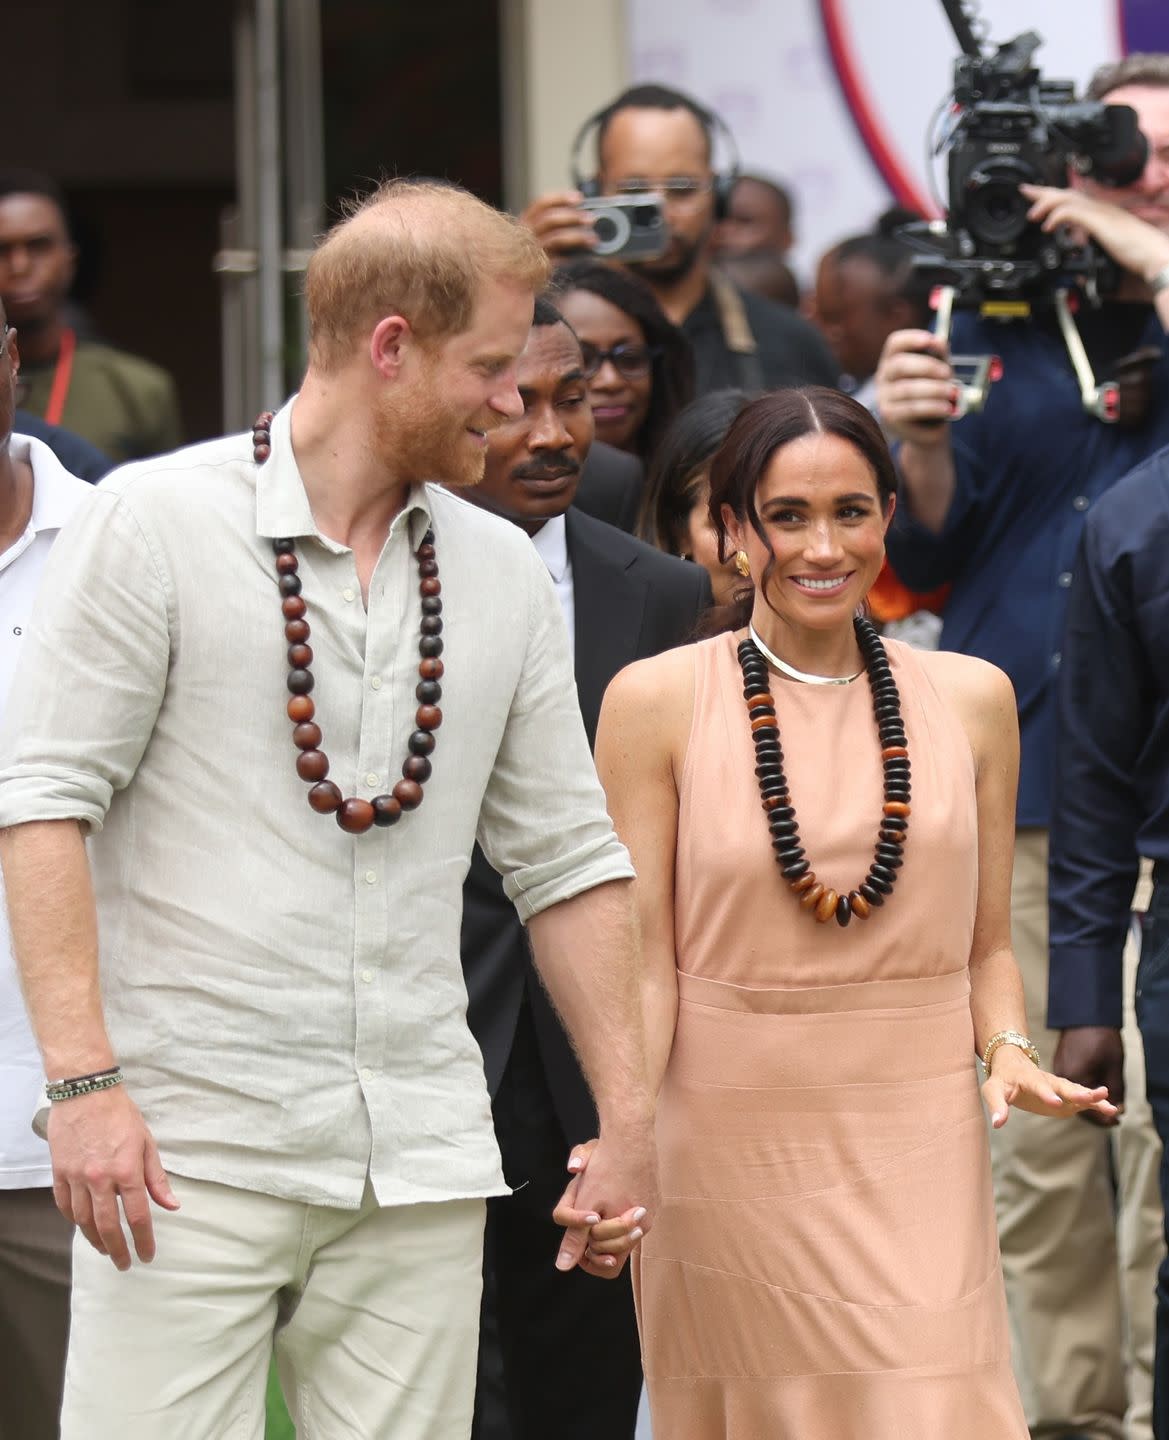 abuja, nigeria may 10 duke of sussex prince harry l his wife meghan markle r, duchess of sussex, visit the lightway academy in abuja, nigeria as part of celebrations of invictus games anniversary on may 10, 2024 photo by emmanuel osodianadolu via getty images